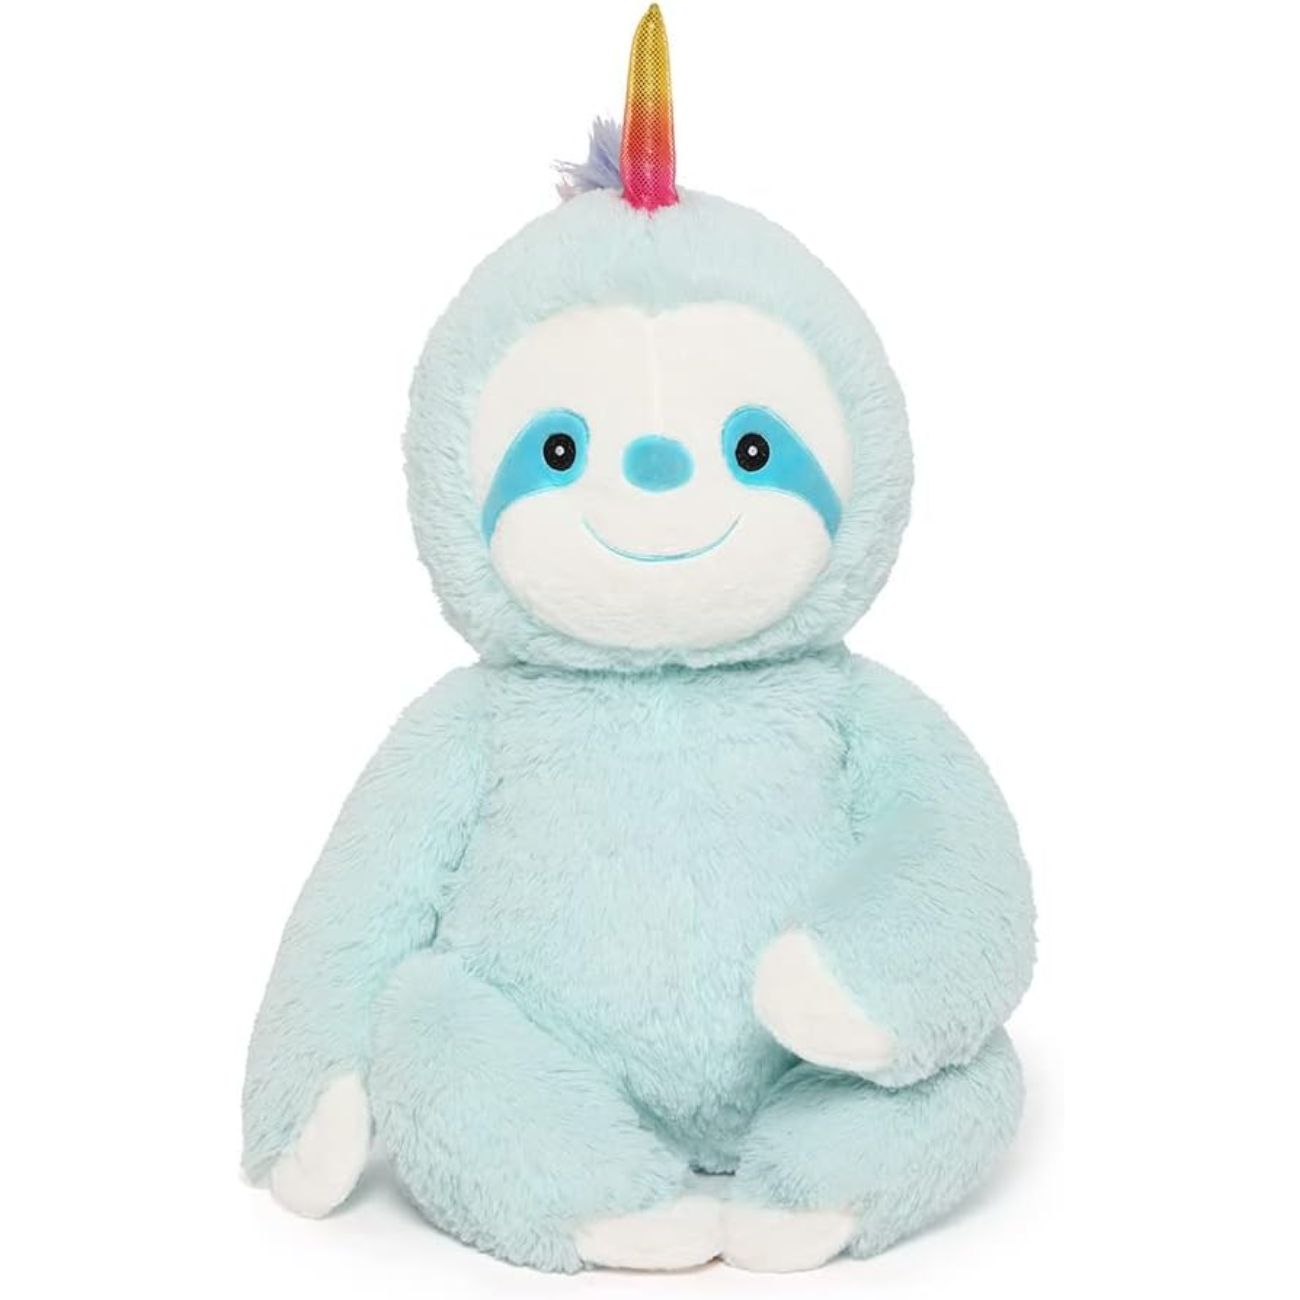 Sloth Stuffed Animal Toy, Light Blue, 17.7 Inches